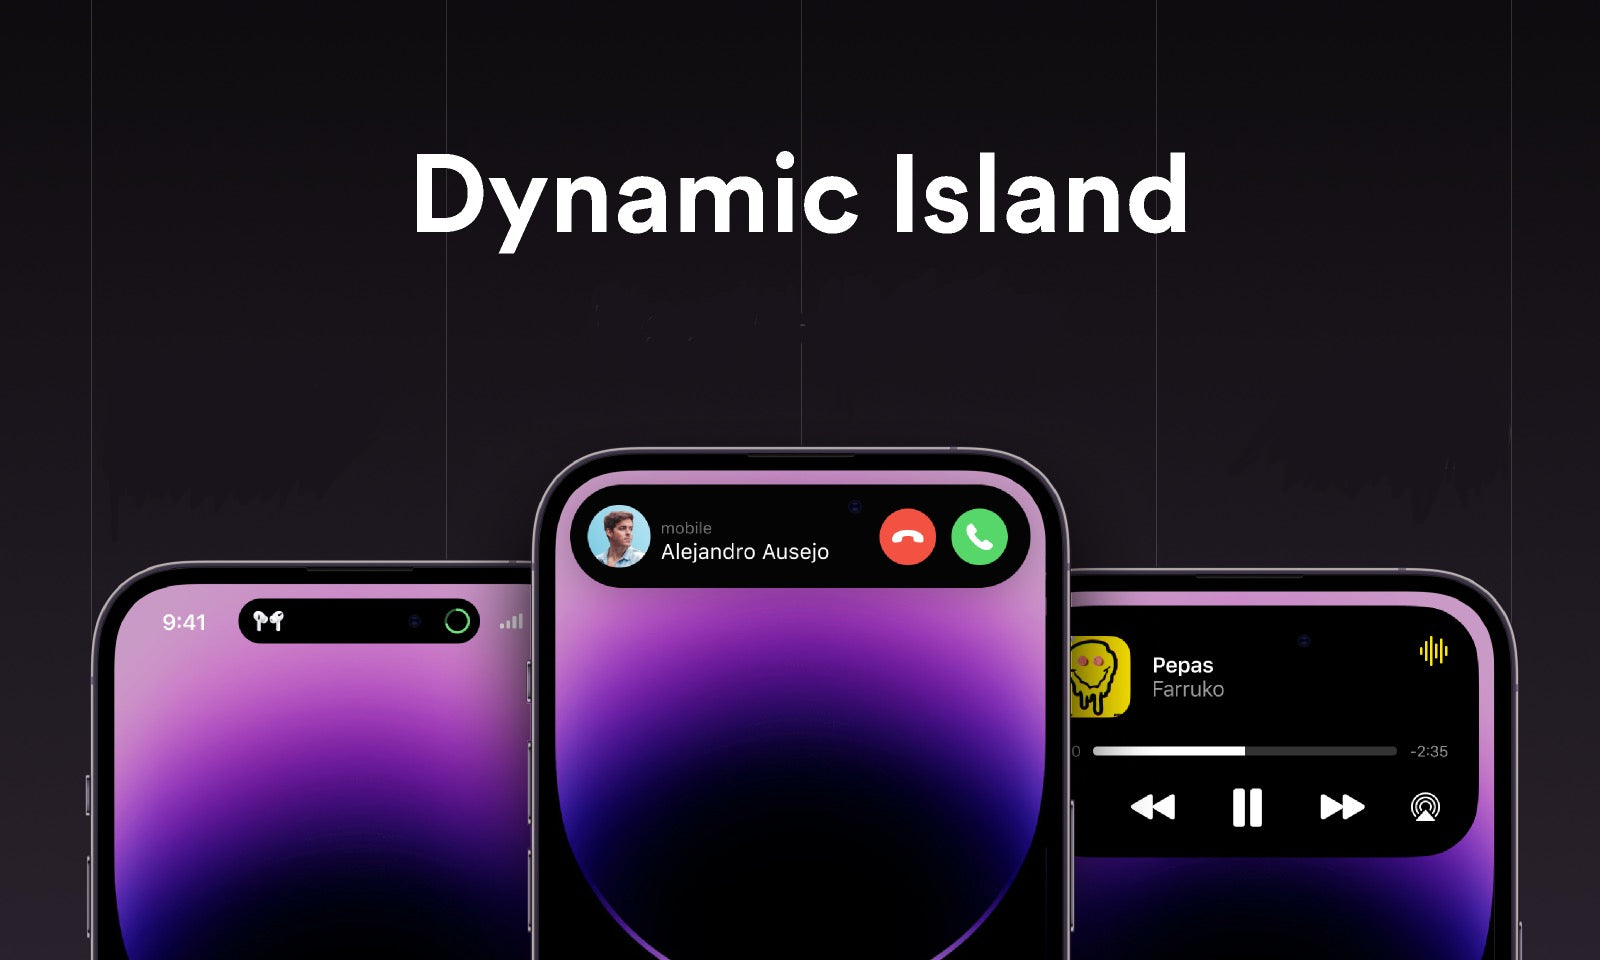 A Guide to Dynamic Island: What it is, what it can do and what's the fun of using it